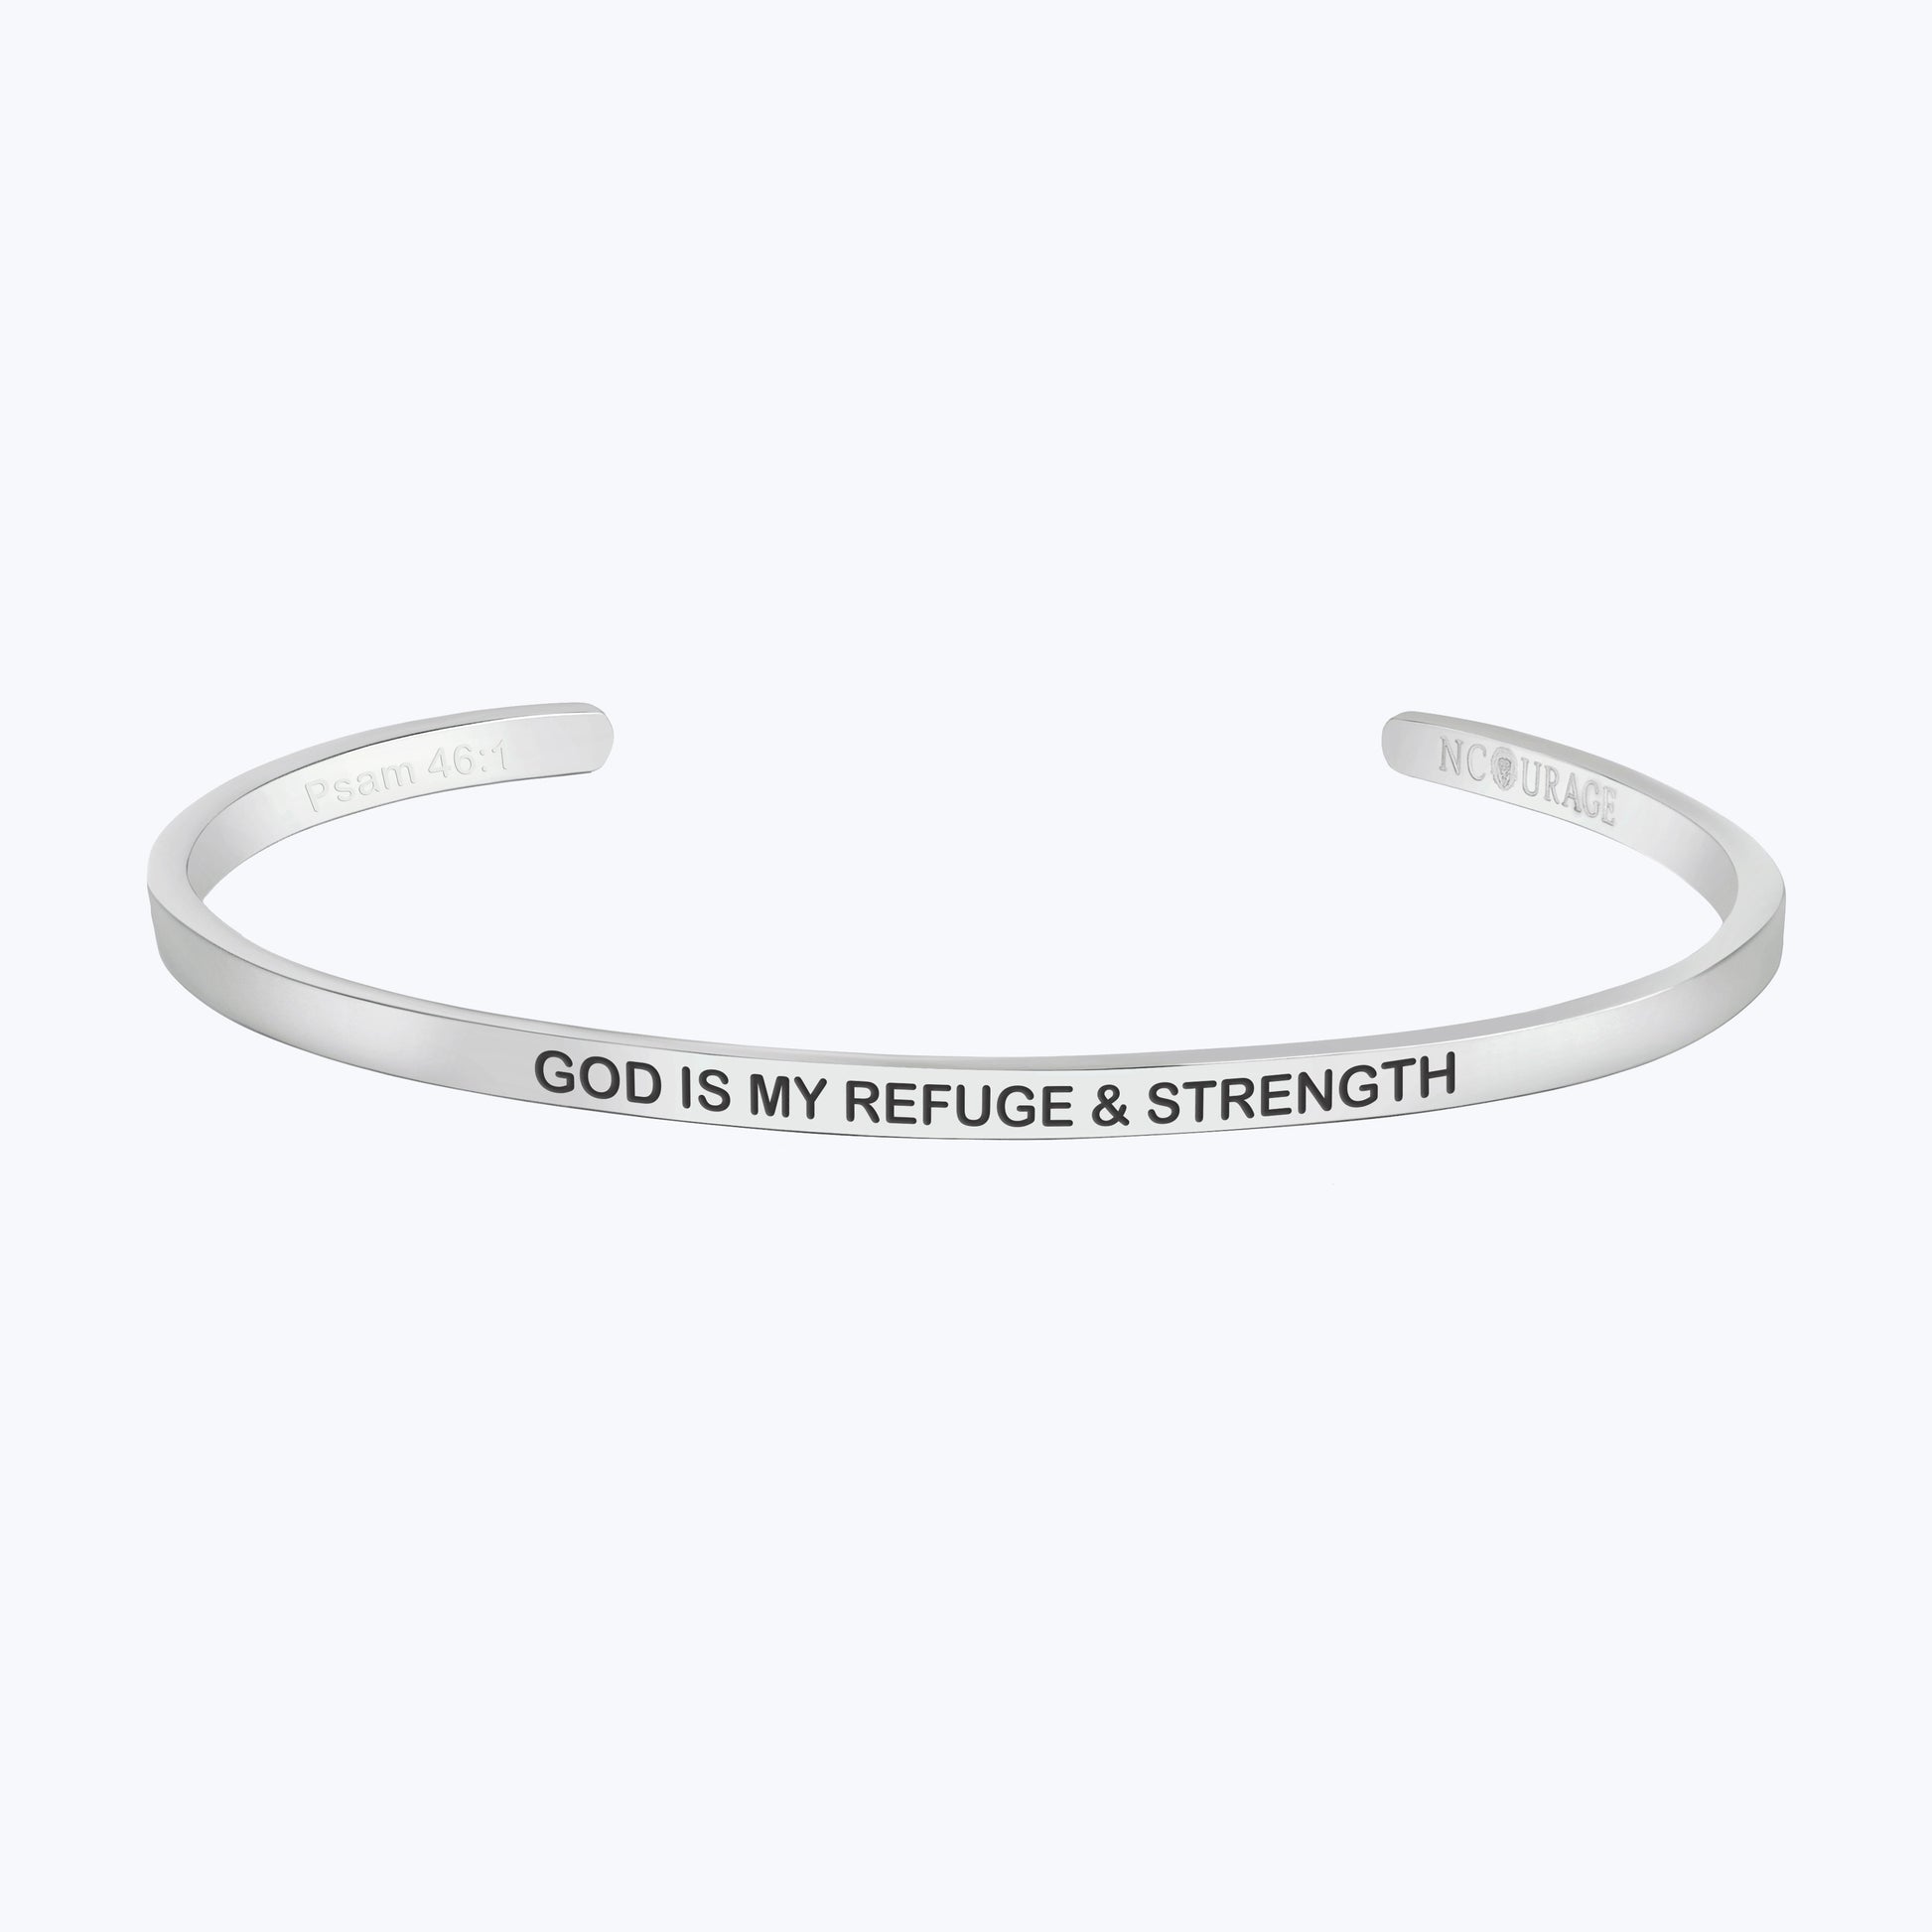 GOD IS MY REFUGE AND STRENGTH - NCOURAGE Bands and Bracelets